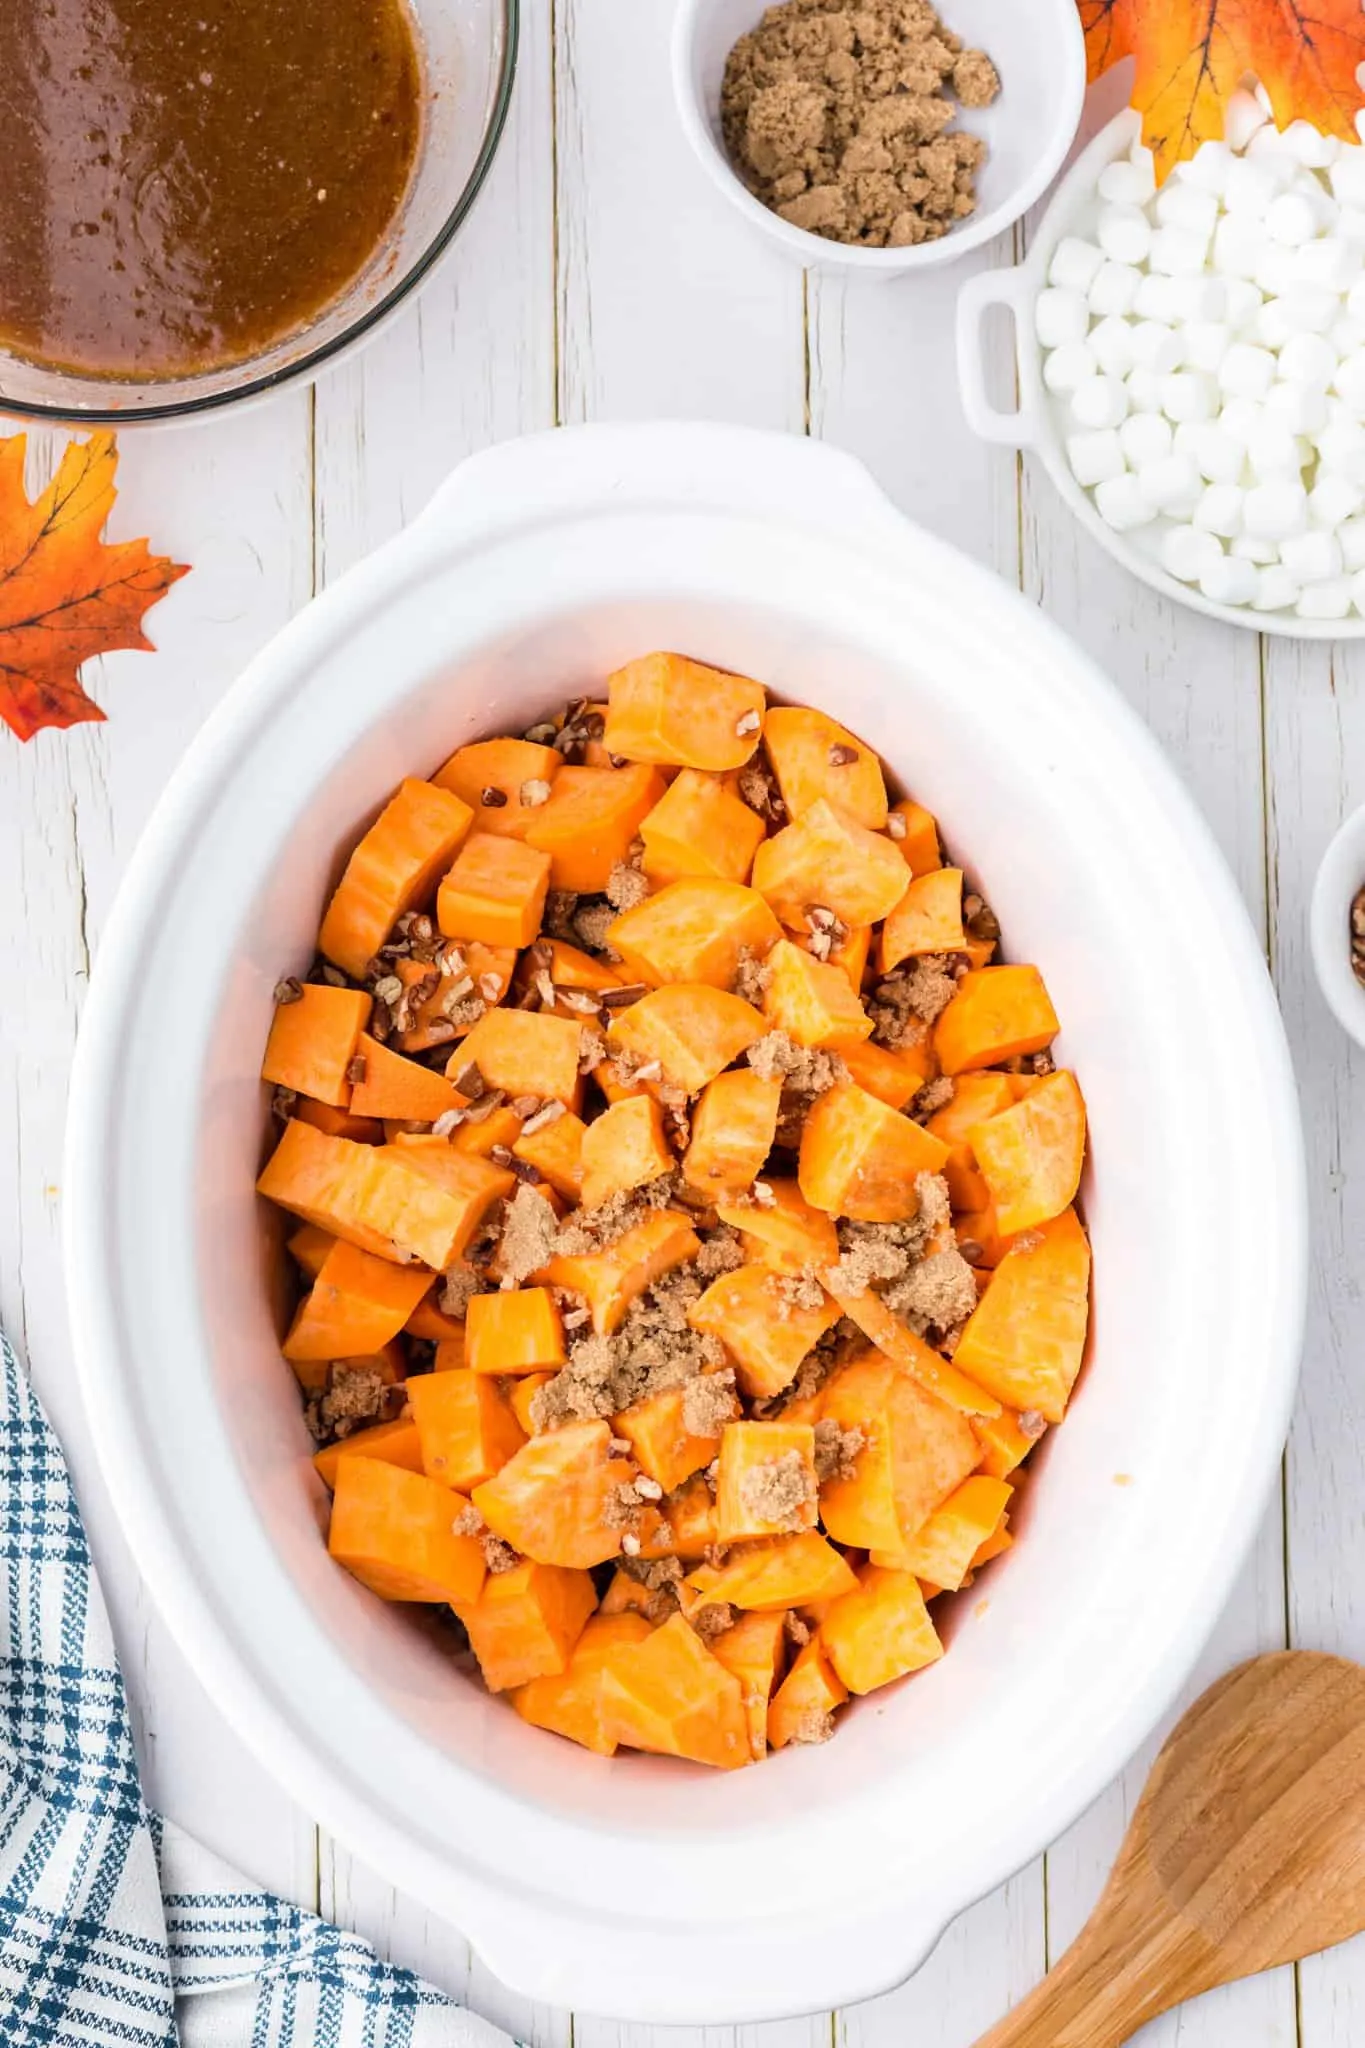 brown sugar and chopped pecans on top of cubed sweet potatoes in a crock pot